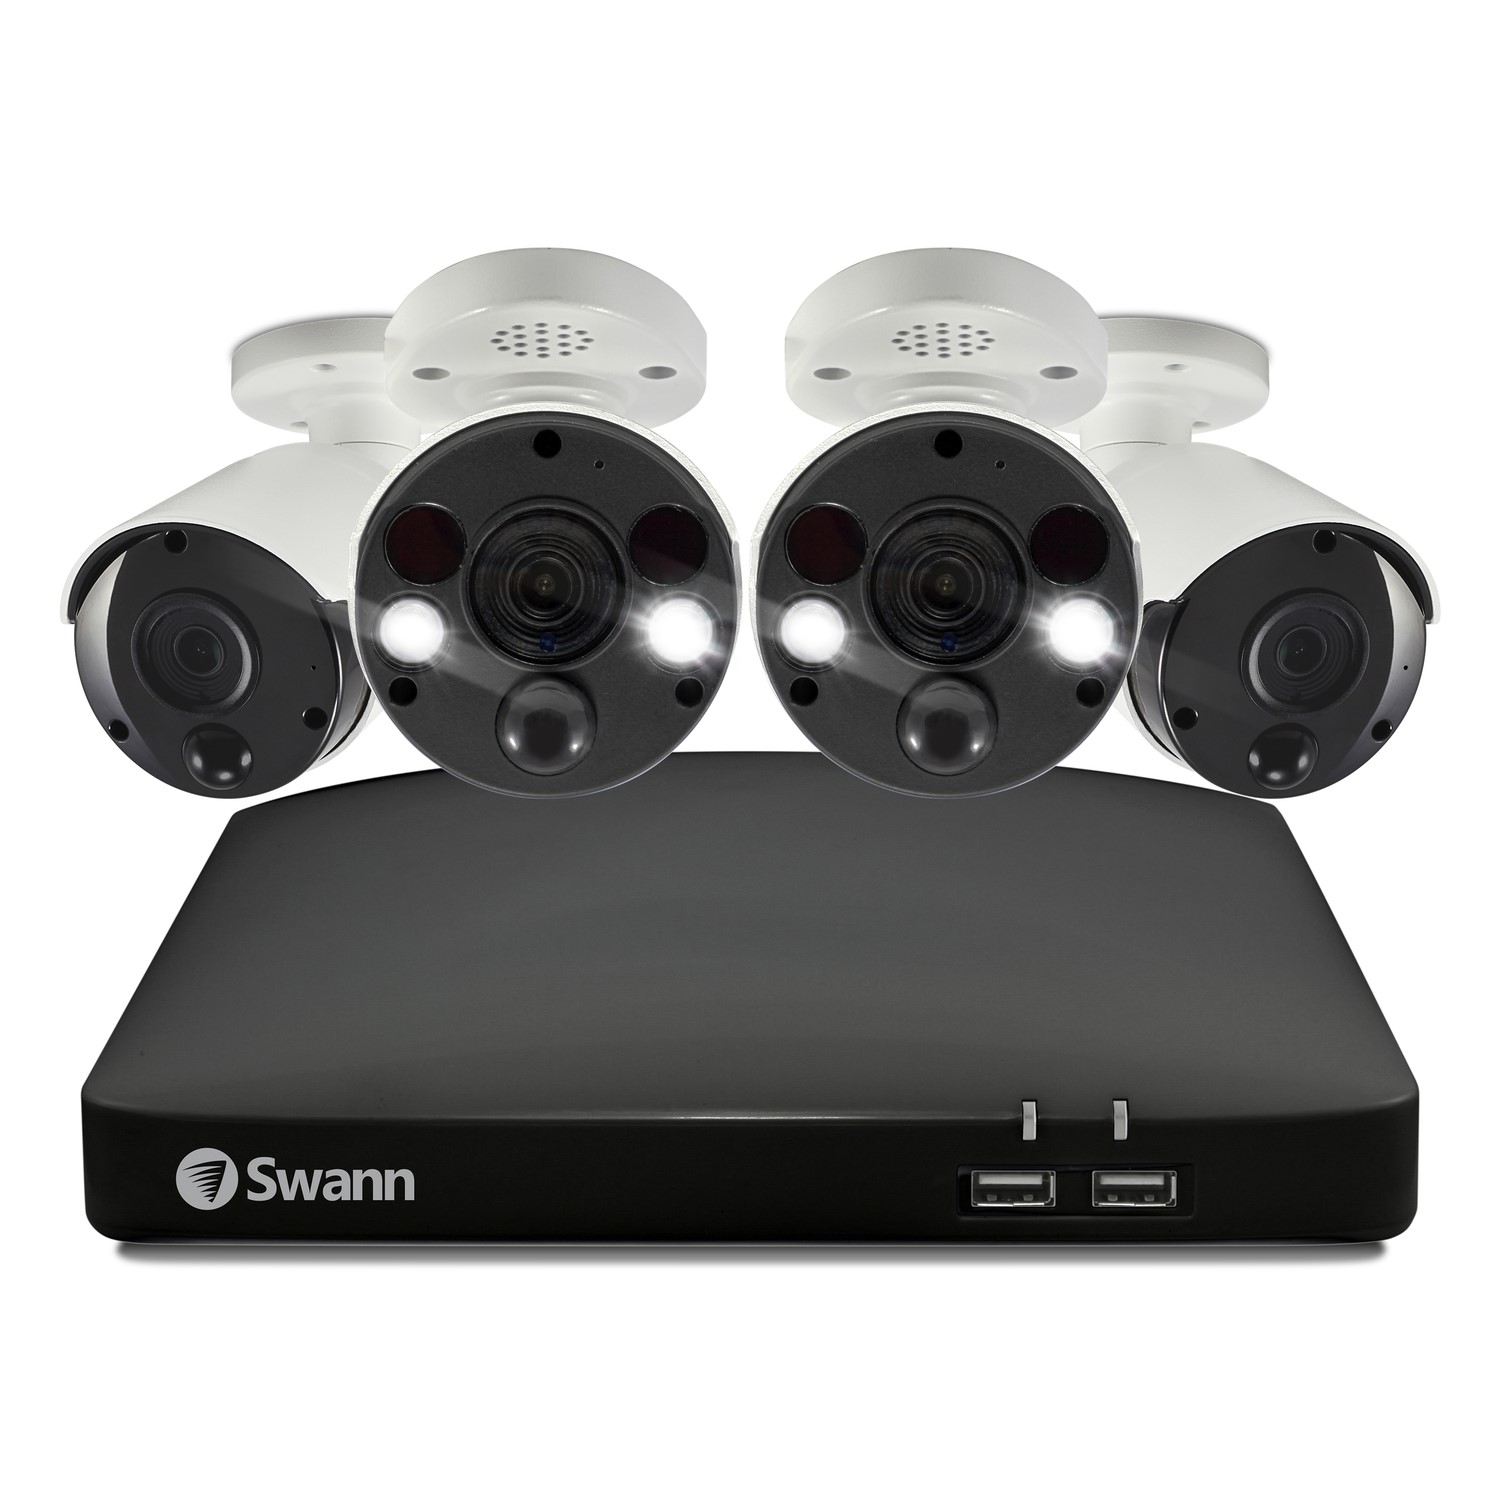 Swann 8 Channel NVR with 4 Bullet Security Cameras 4K - Black / White